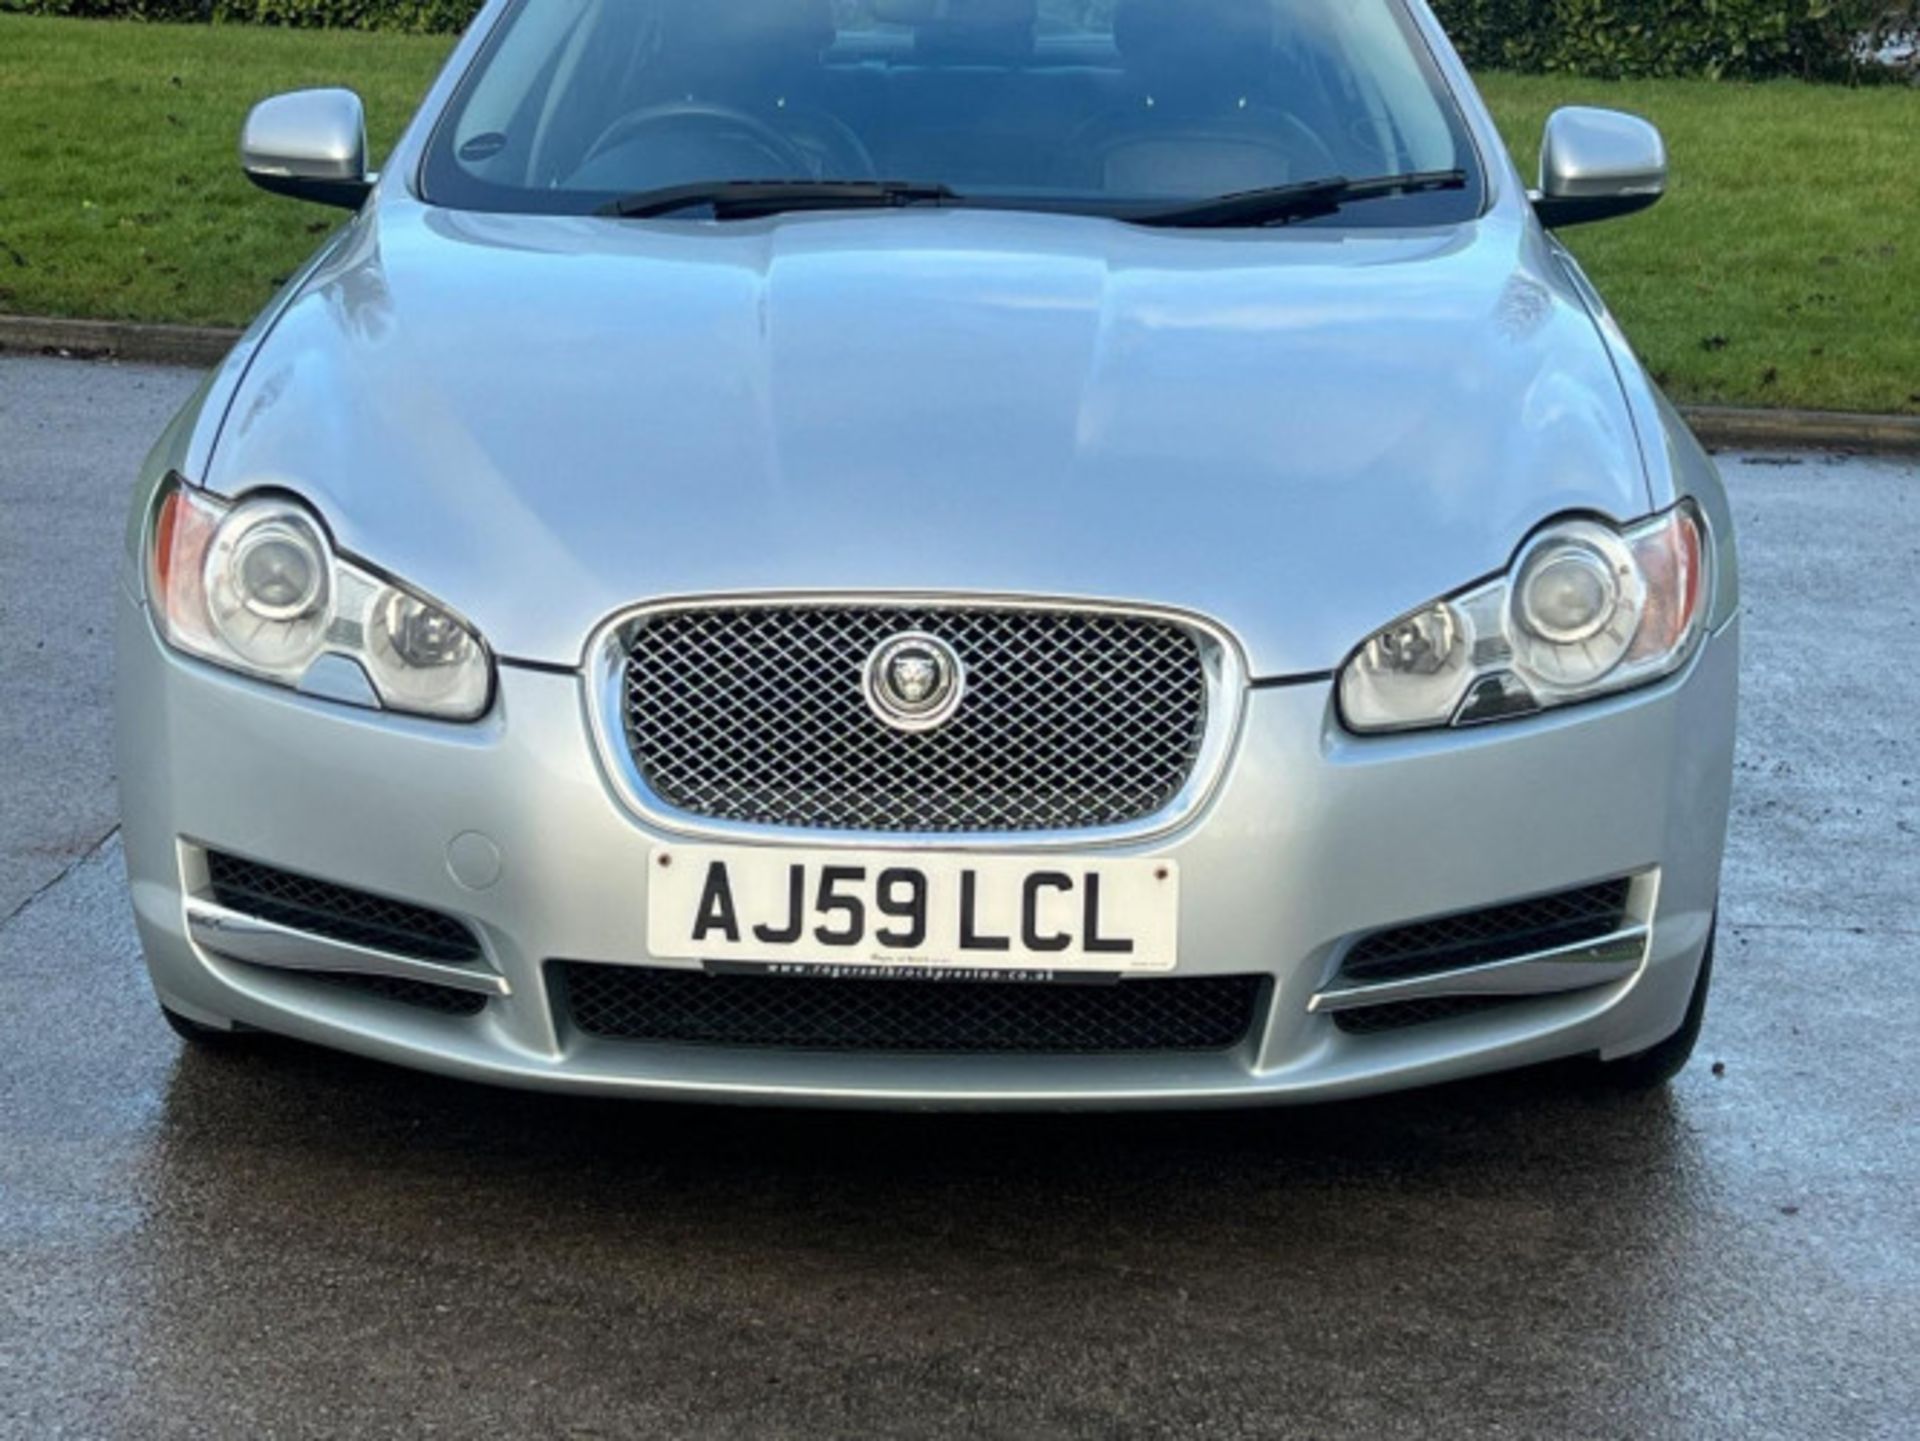 LUXURIOUS JAGUAR XF 3.0D V6 LUXURY 4DR AUTOMATIC SALOON >>--NO VAT ON HAMMER--<< - Image 75 of 80